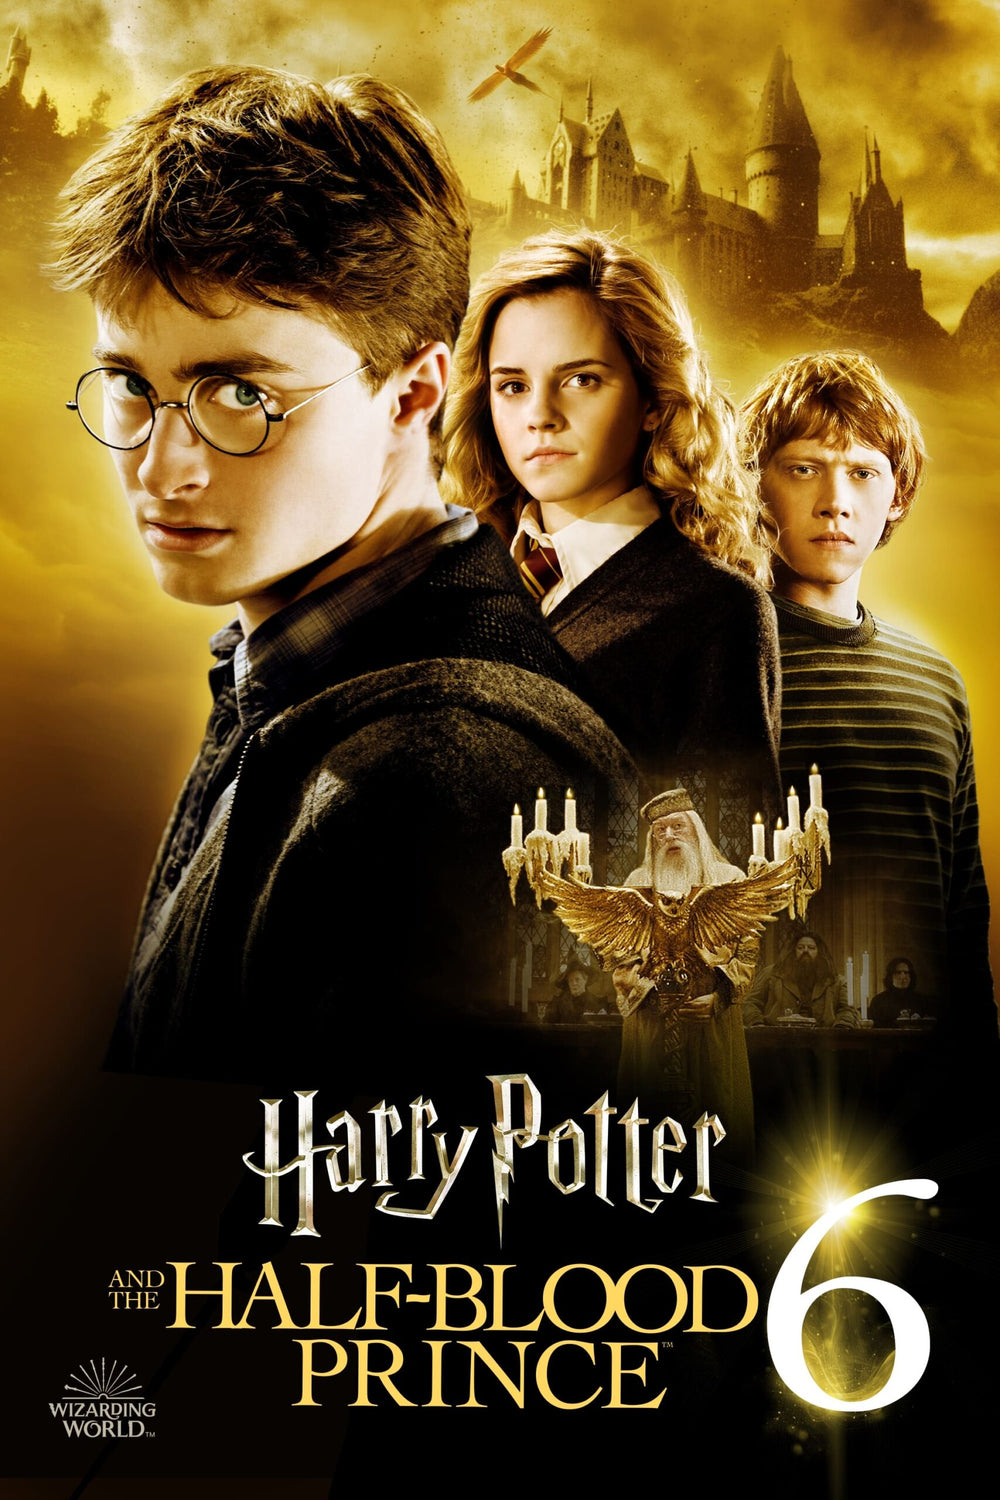 HARRY POTTER AND THE HALF-BLOOD PRINCE 4K Vudu/iTunes Via Moviesanywhere